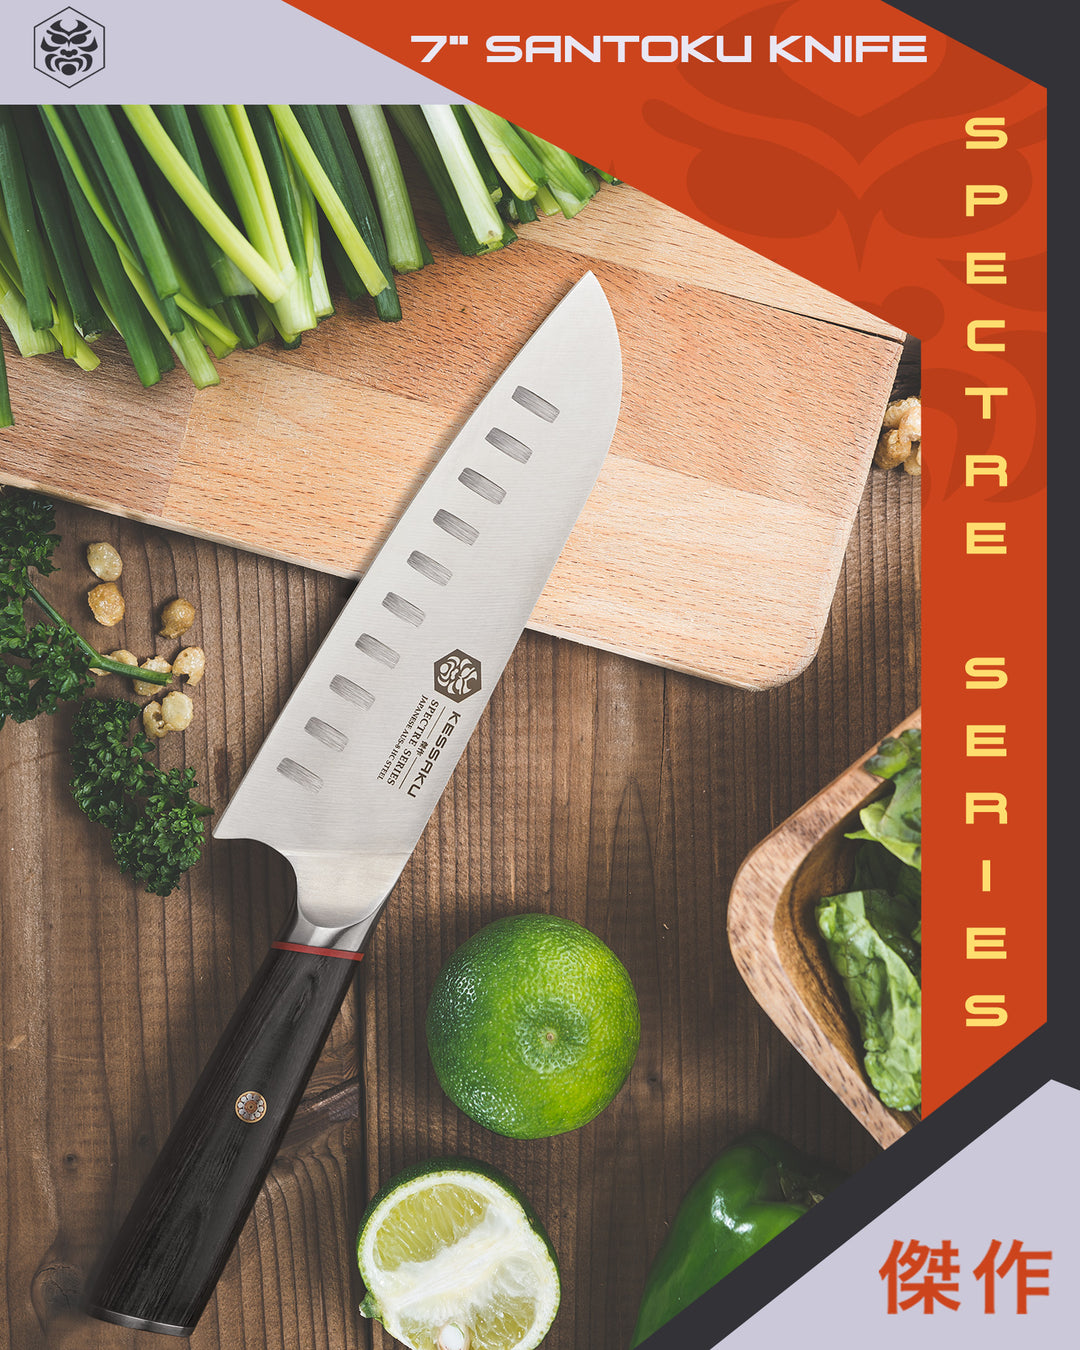 The Spectre Santoku Knife on a cutting board with green peppers, limes, green onions, and leafy greens.